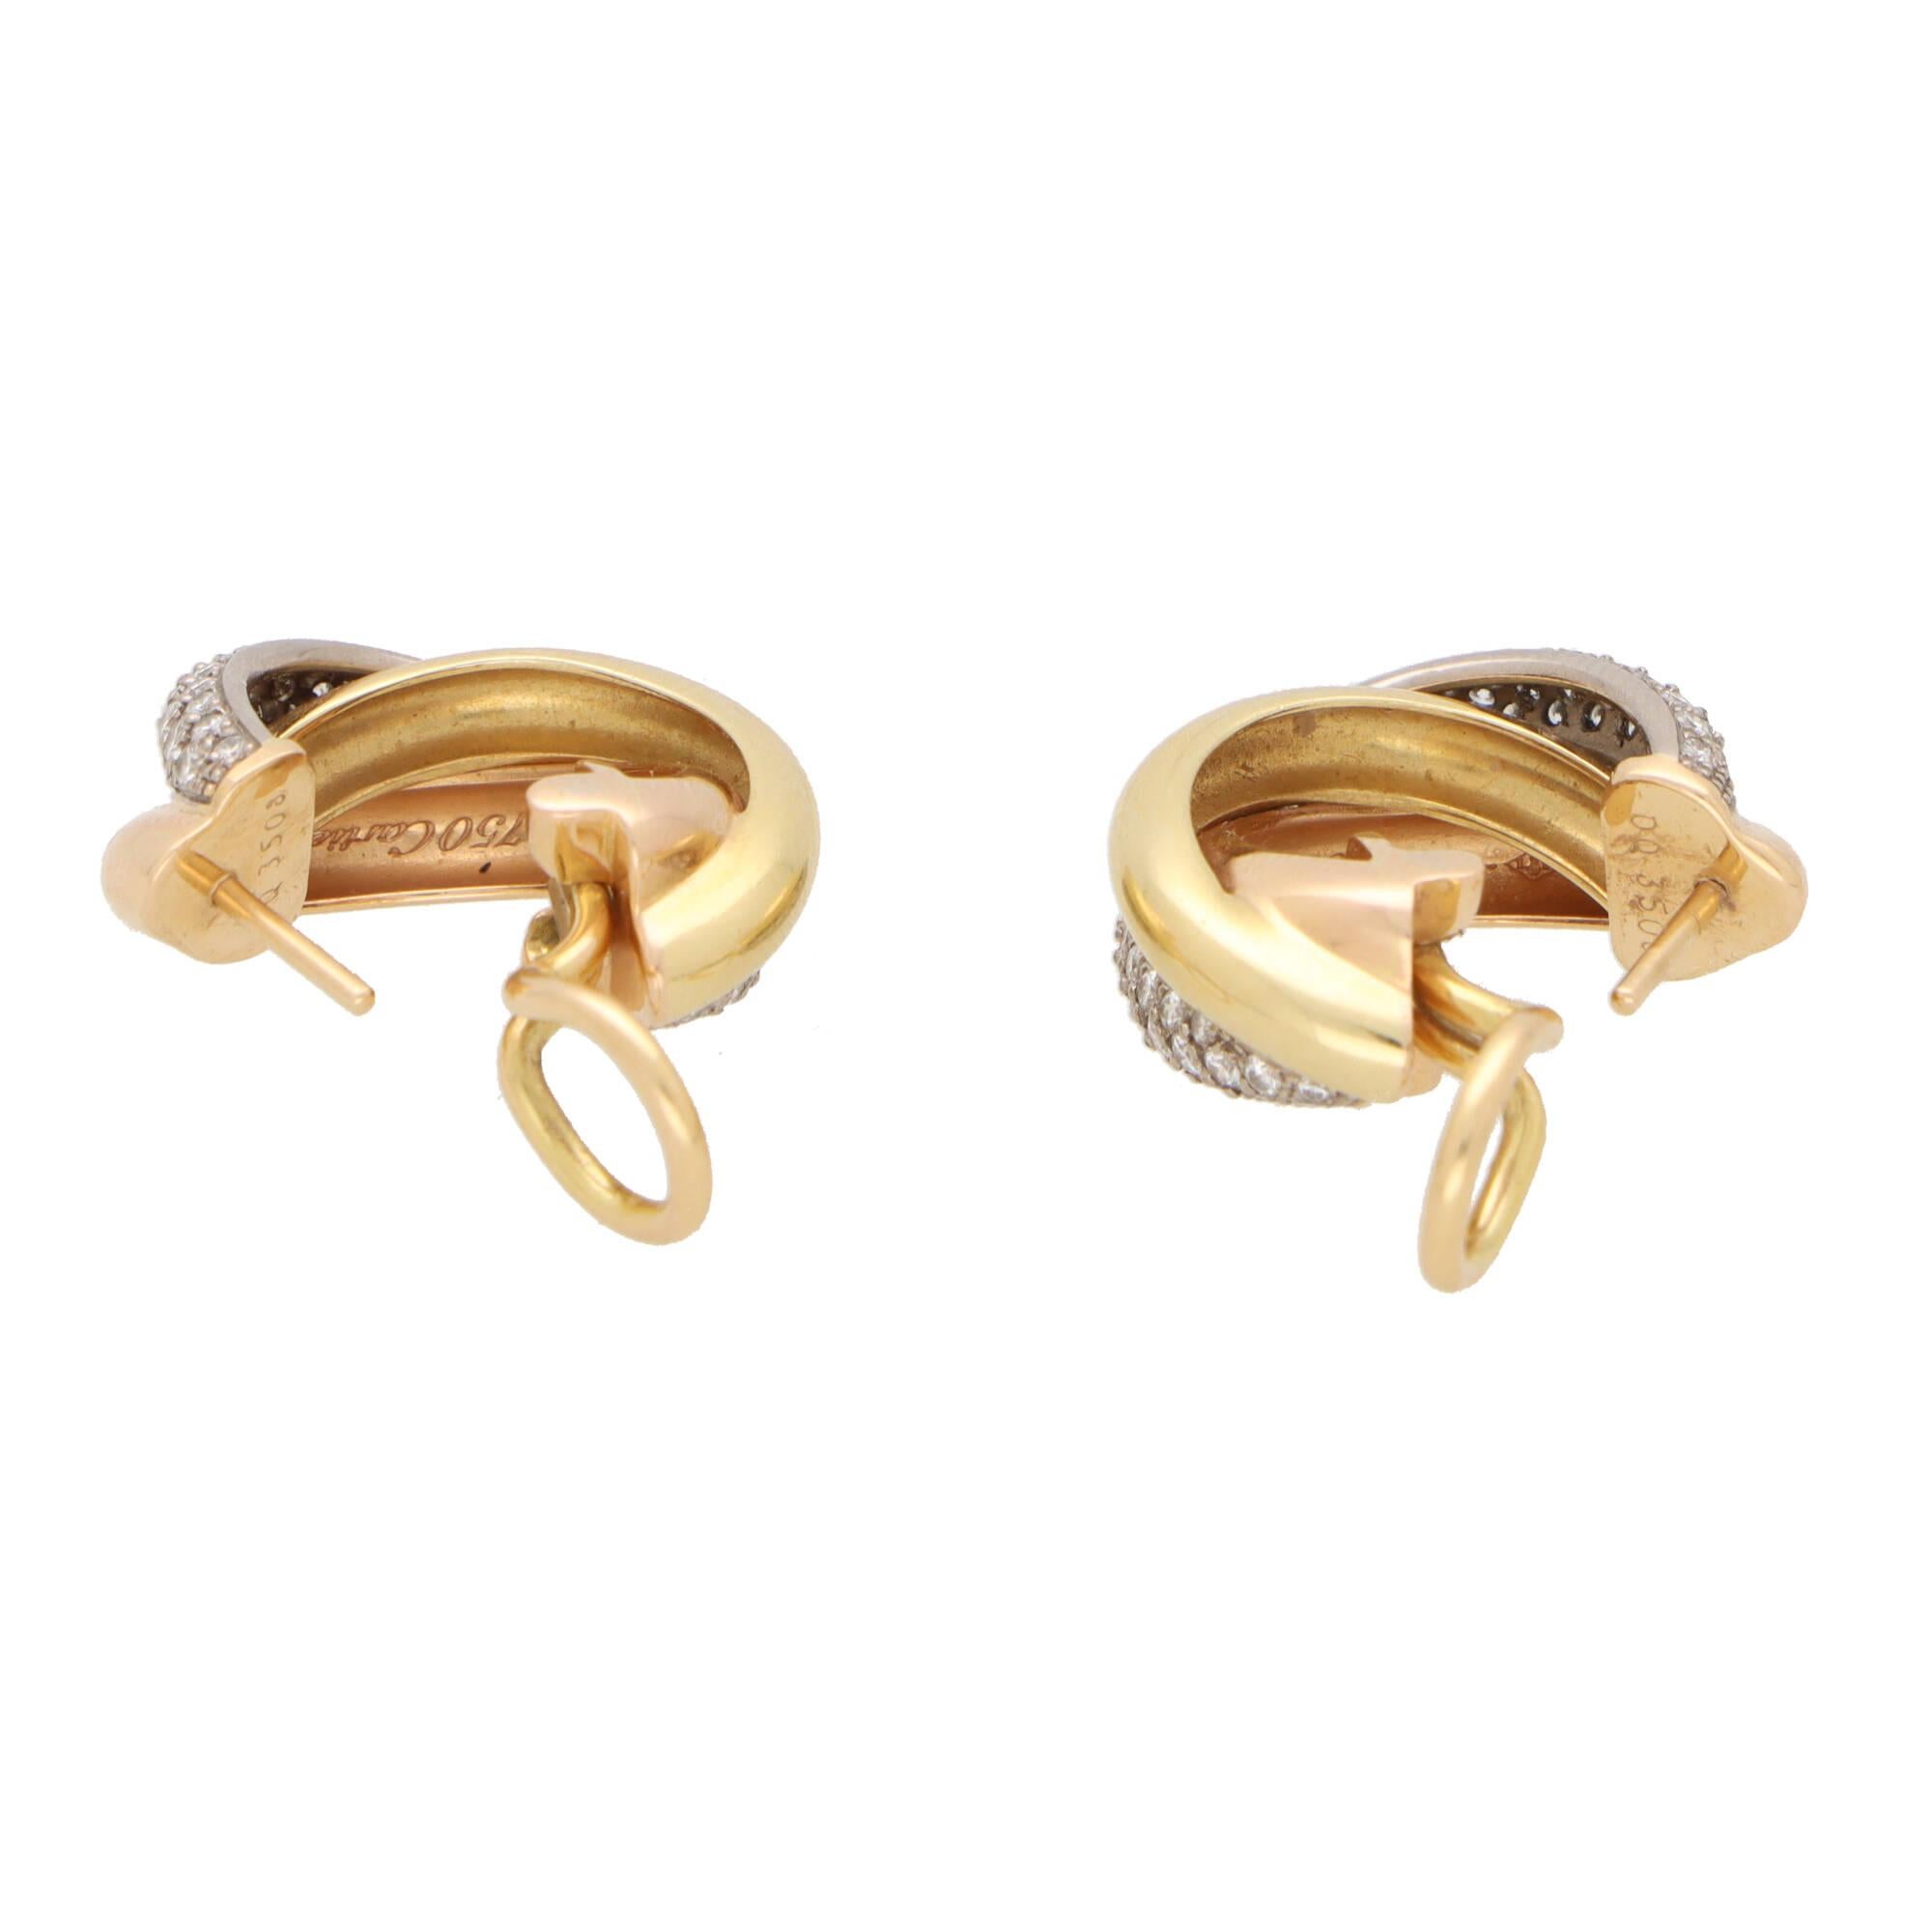 Modern Vintage Cartier Diamond Trinity Hoop Earrings in 18k Yellow, Rose and White Gold